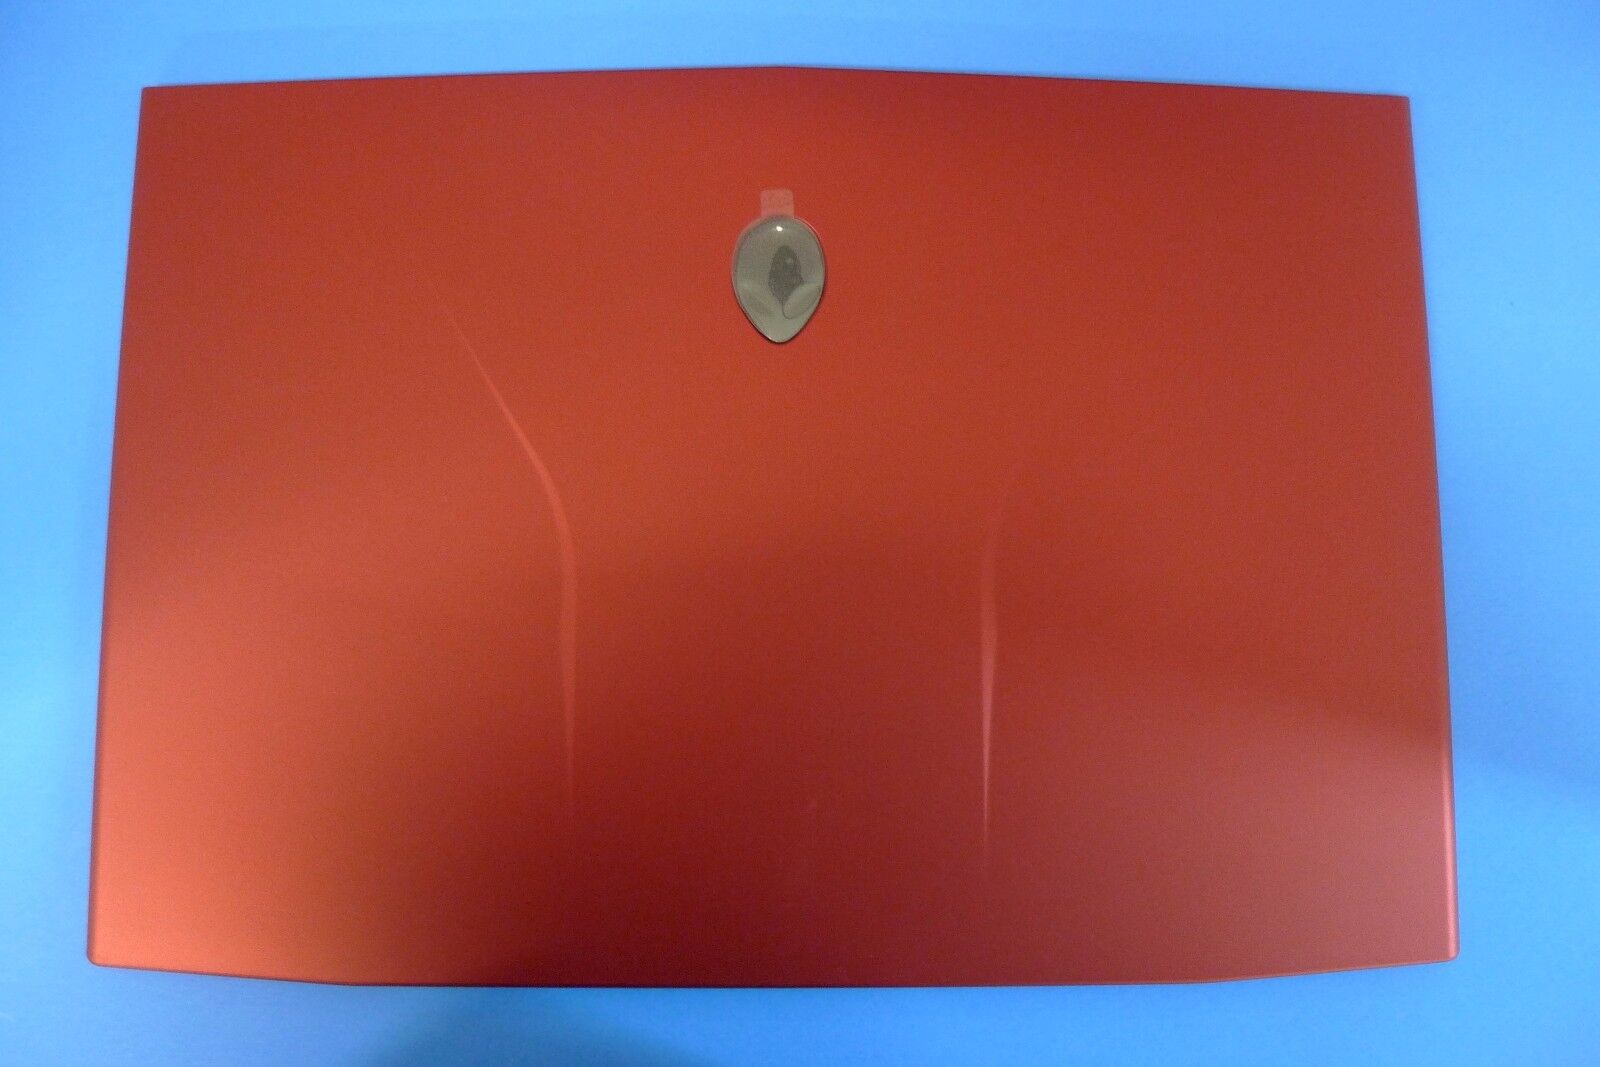 NEW Genuine Alienware M17xR3 R4 RED LCD Rear Back Cover Lid 0MKH2